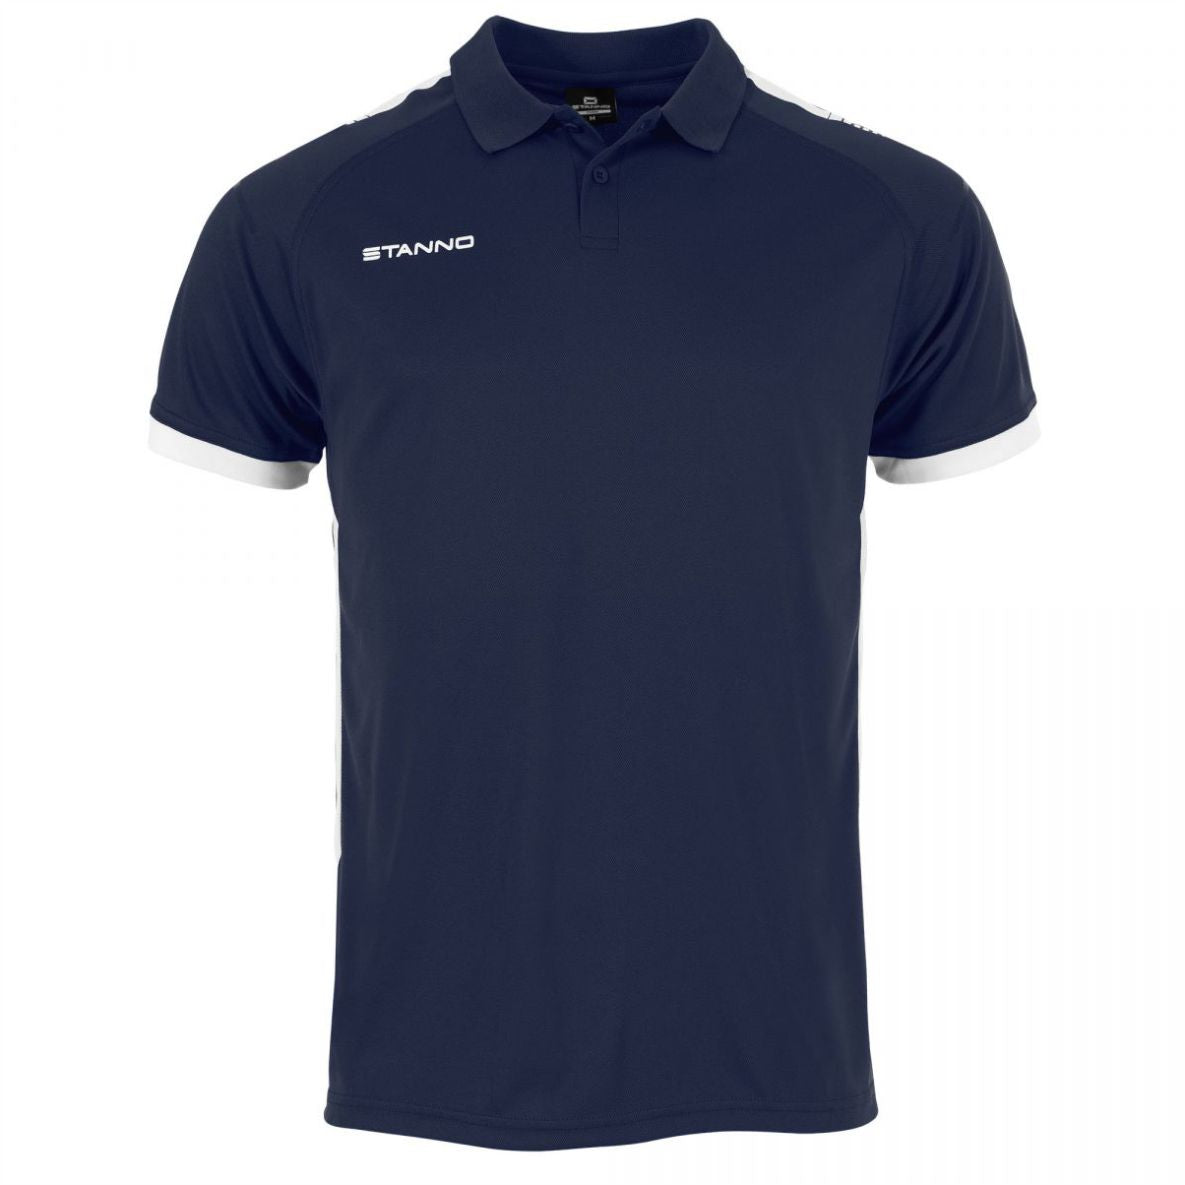 Stanno - First Polo - Navy